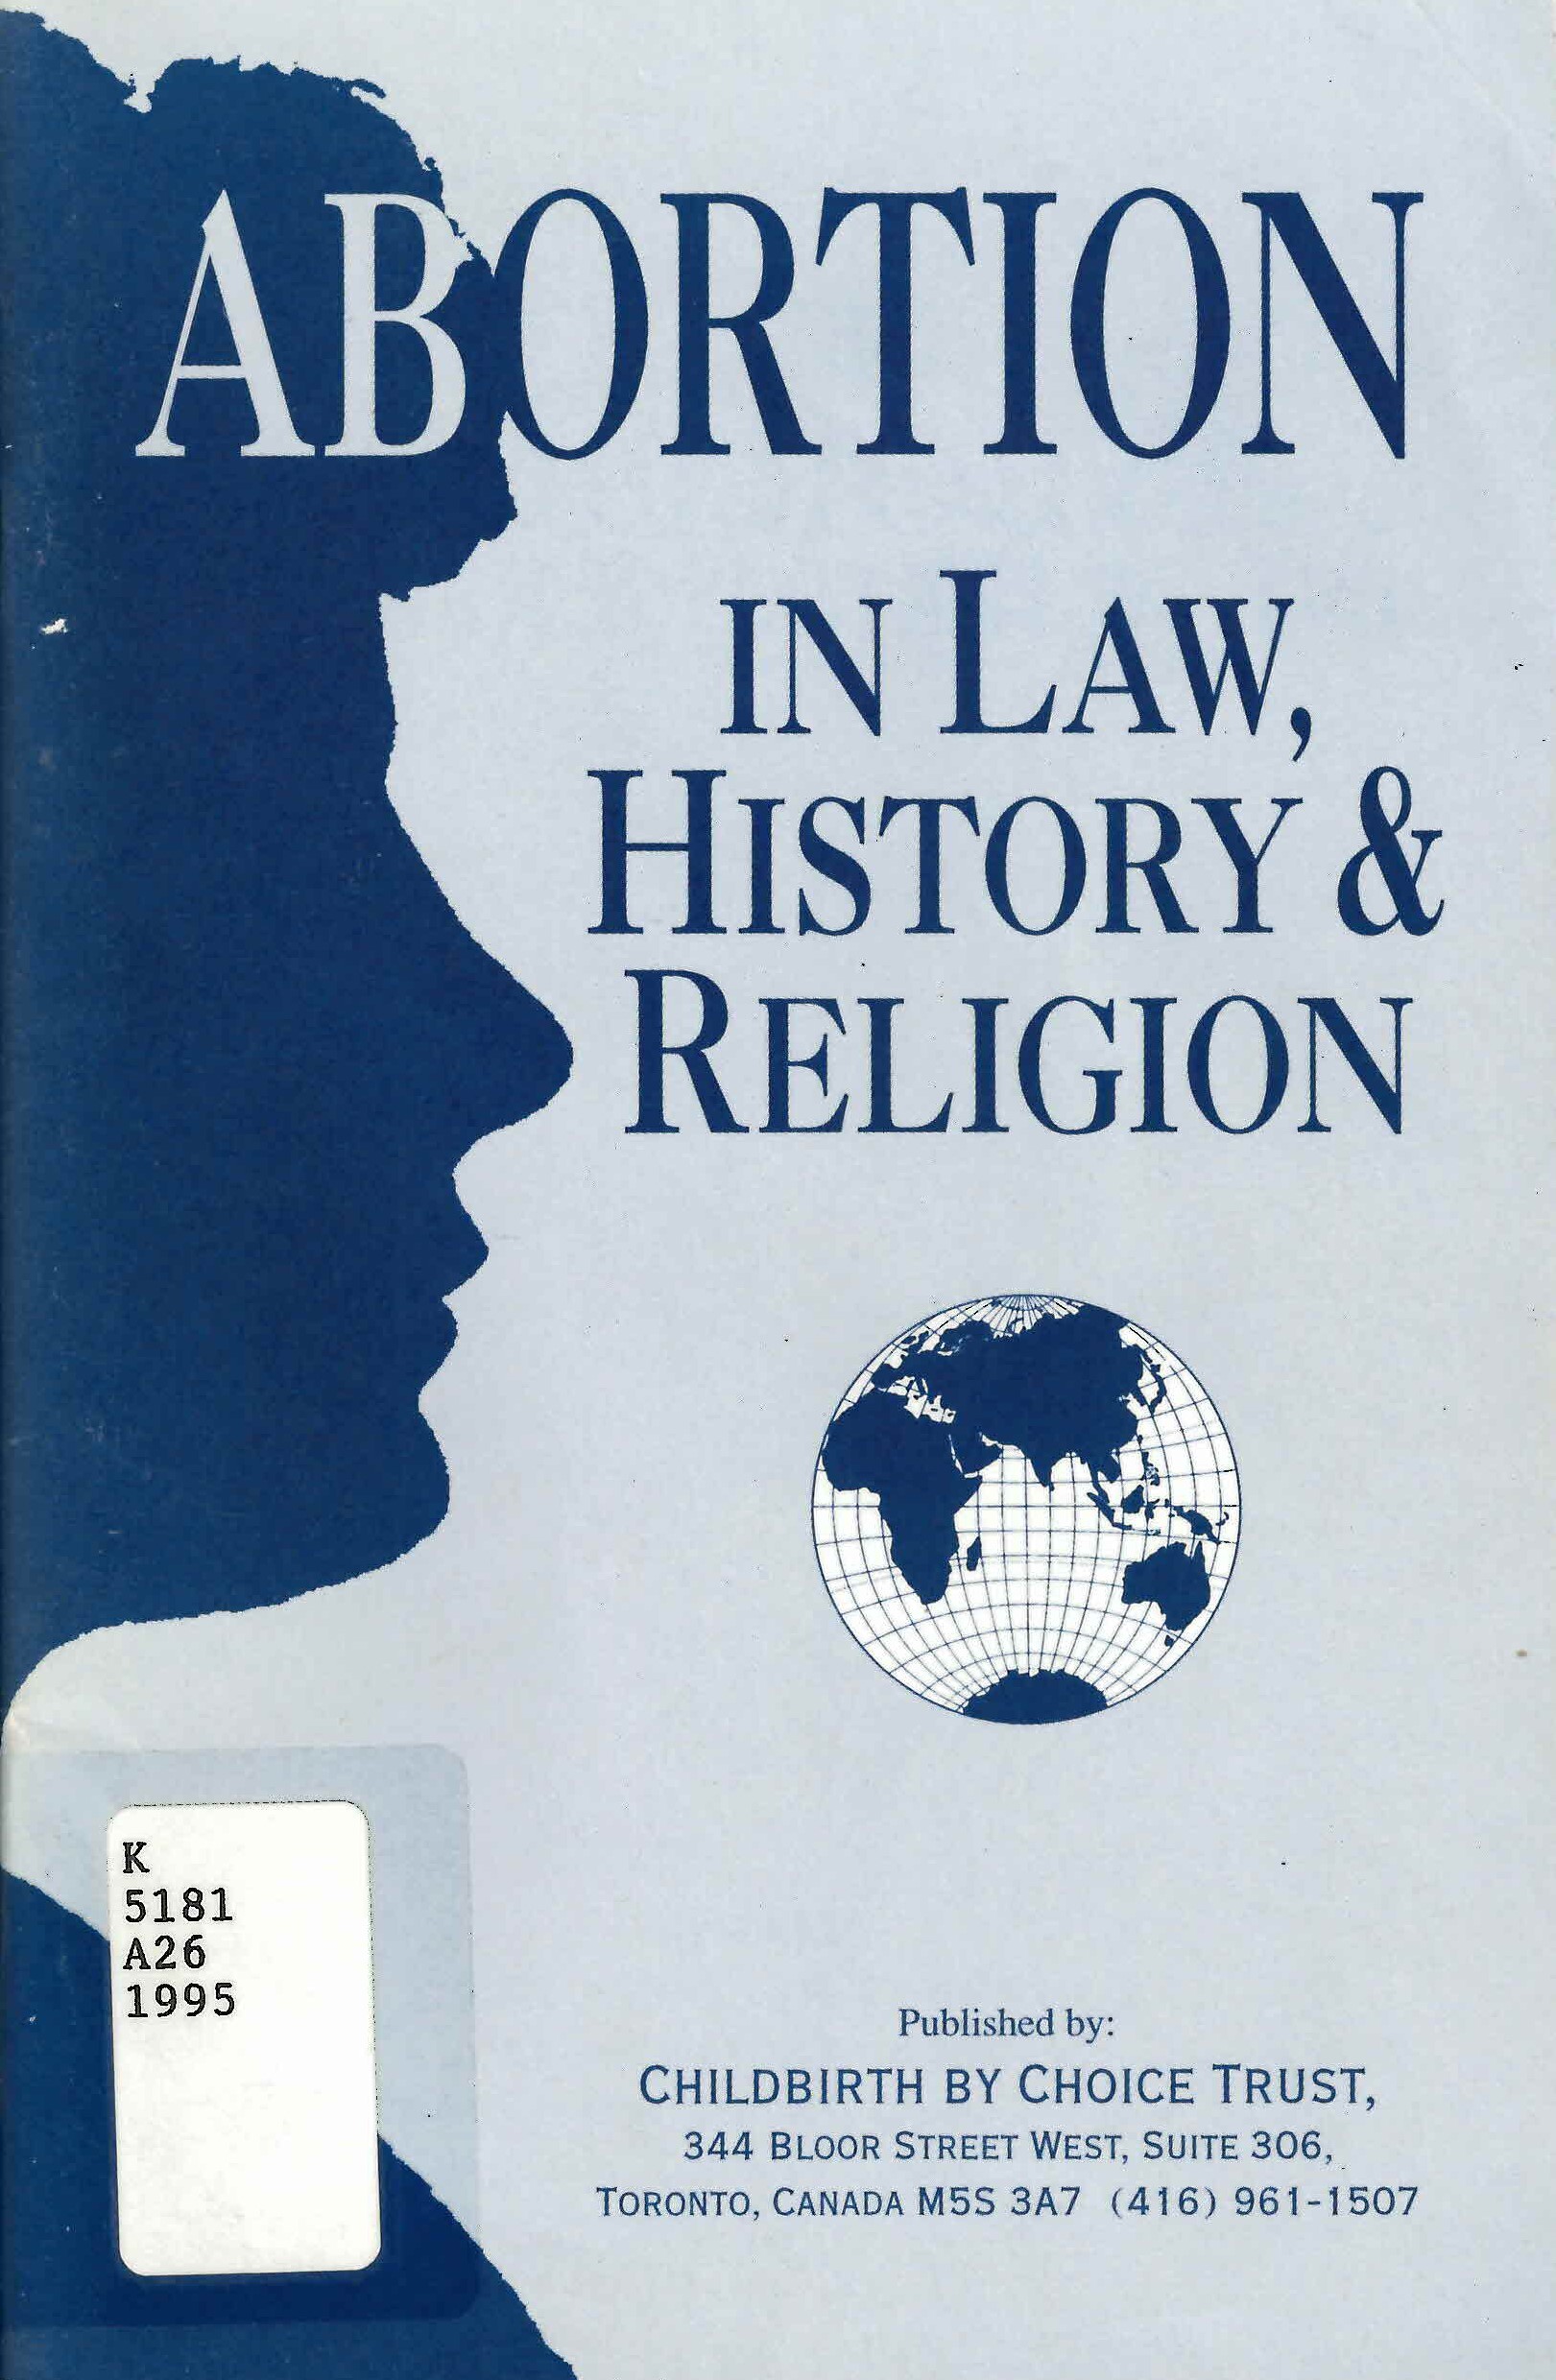 Abortion in law, history & religion.